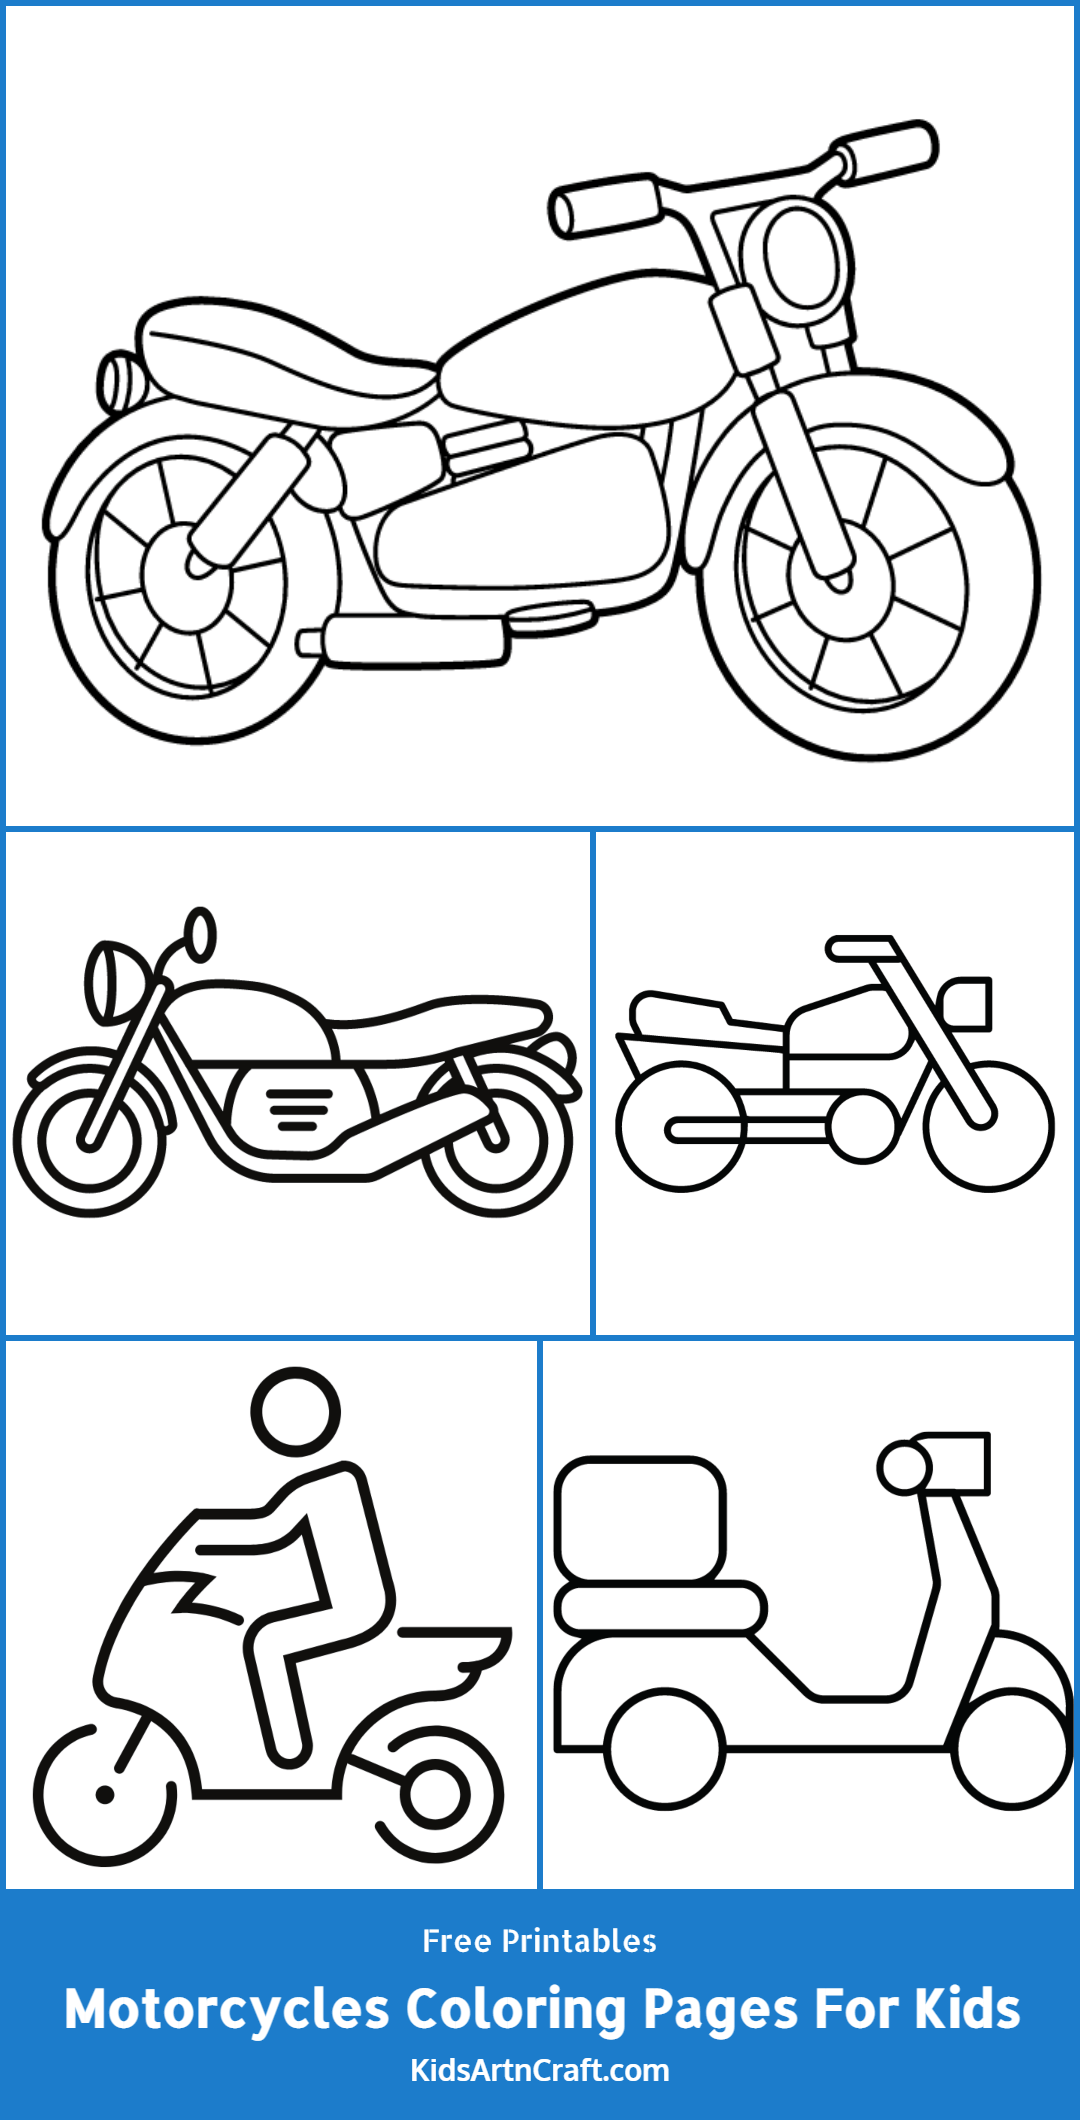 Motorcycles Coloring Pages For Kids – Free Printables